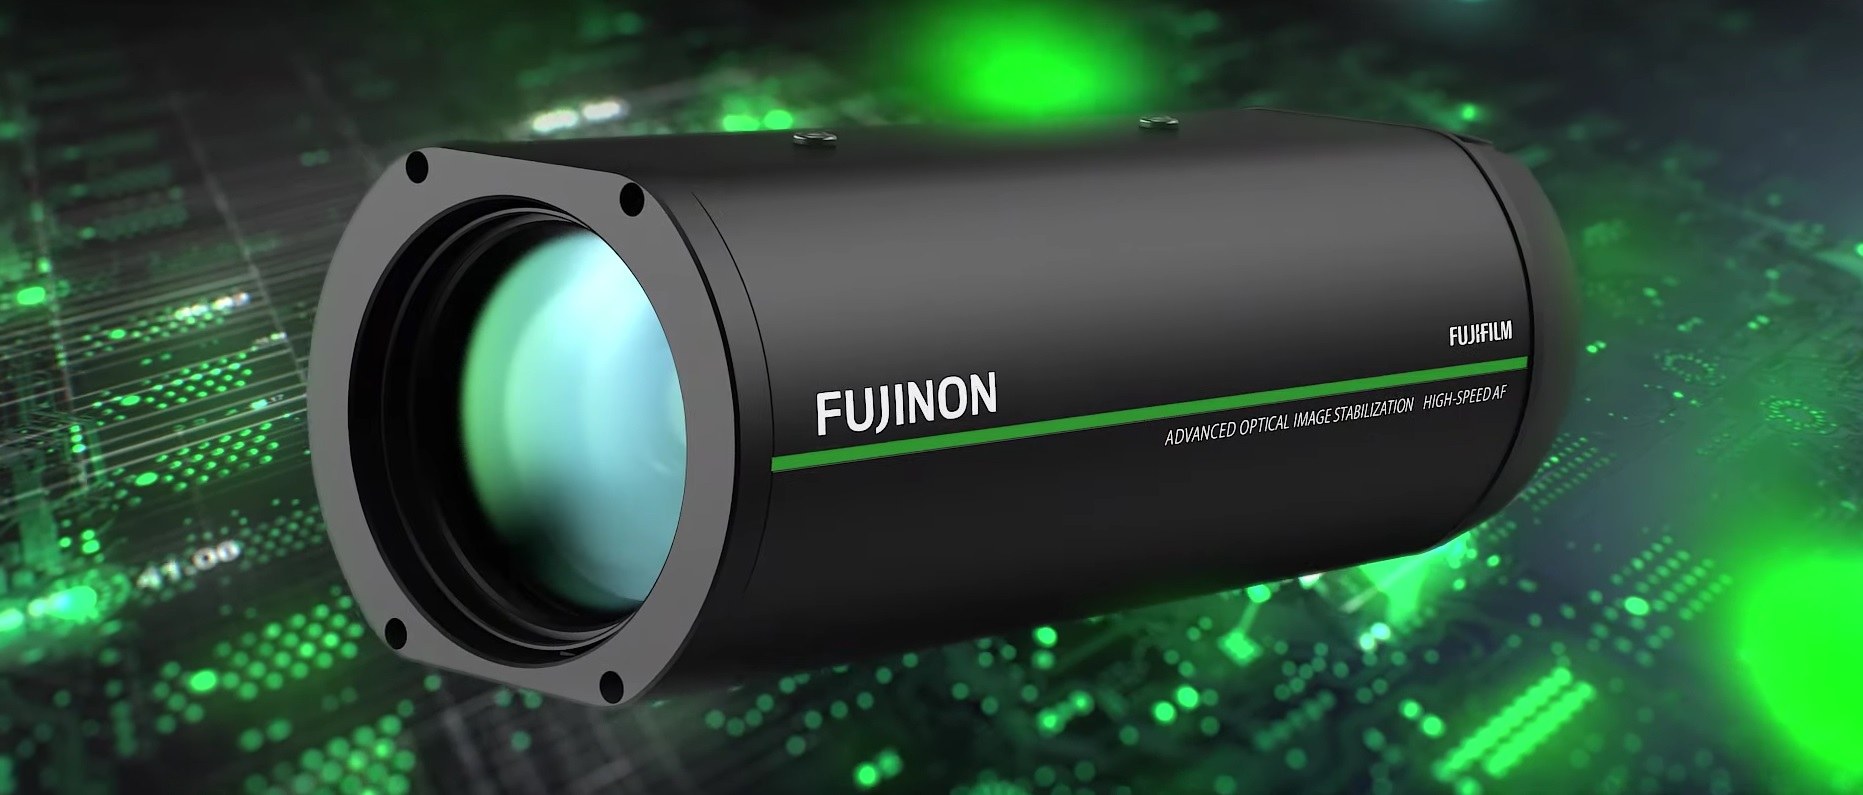 Fujifilm's new SX800 surveillance camera can read license plates from 1km away